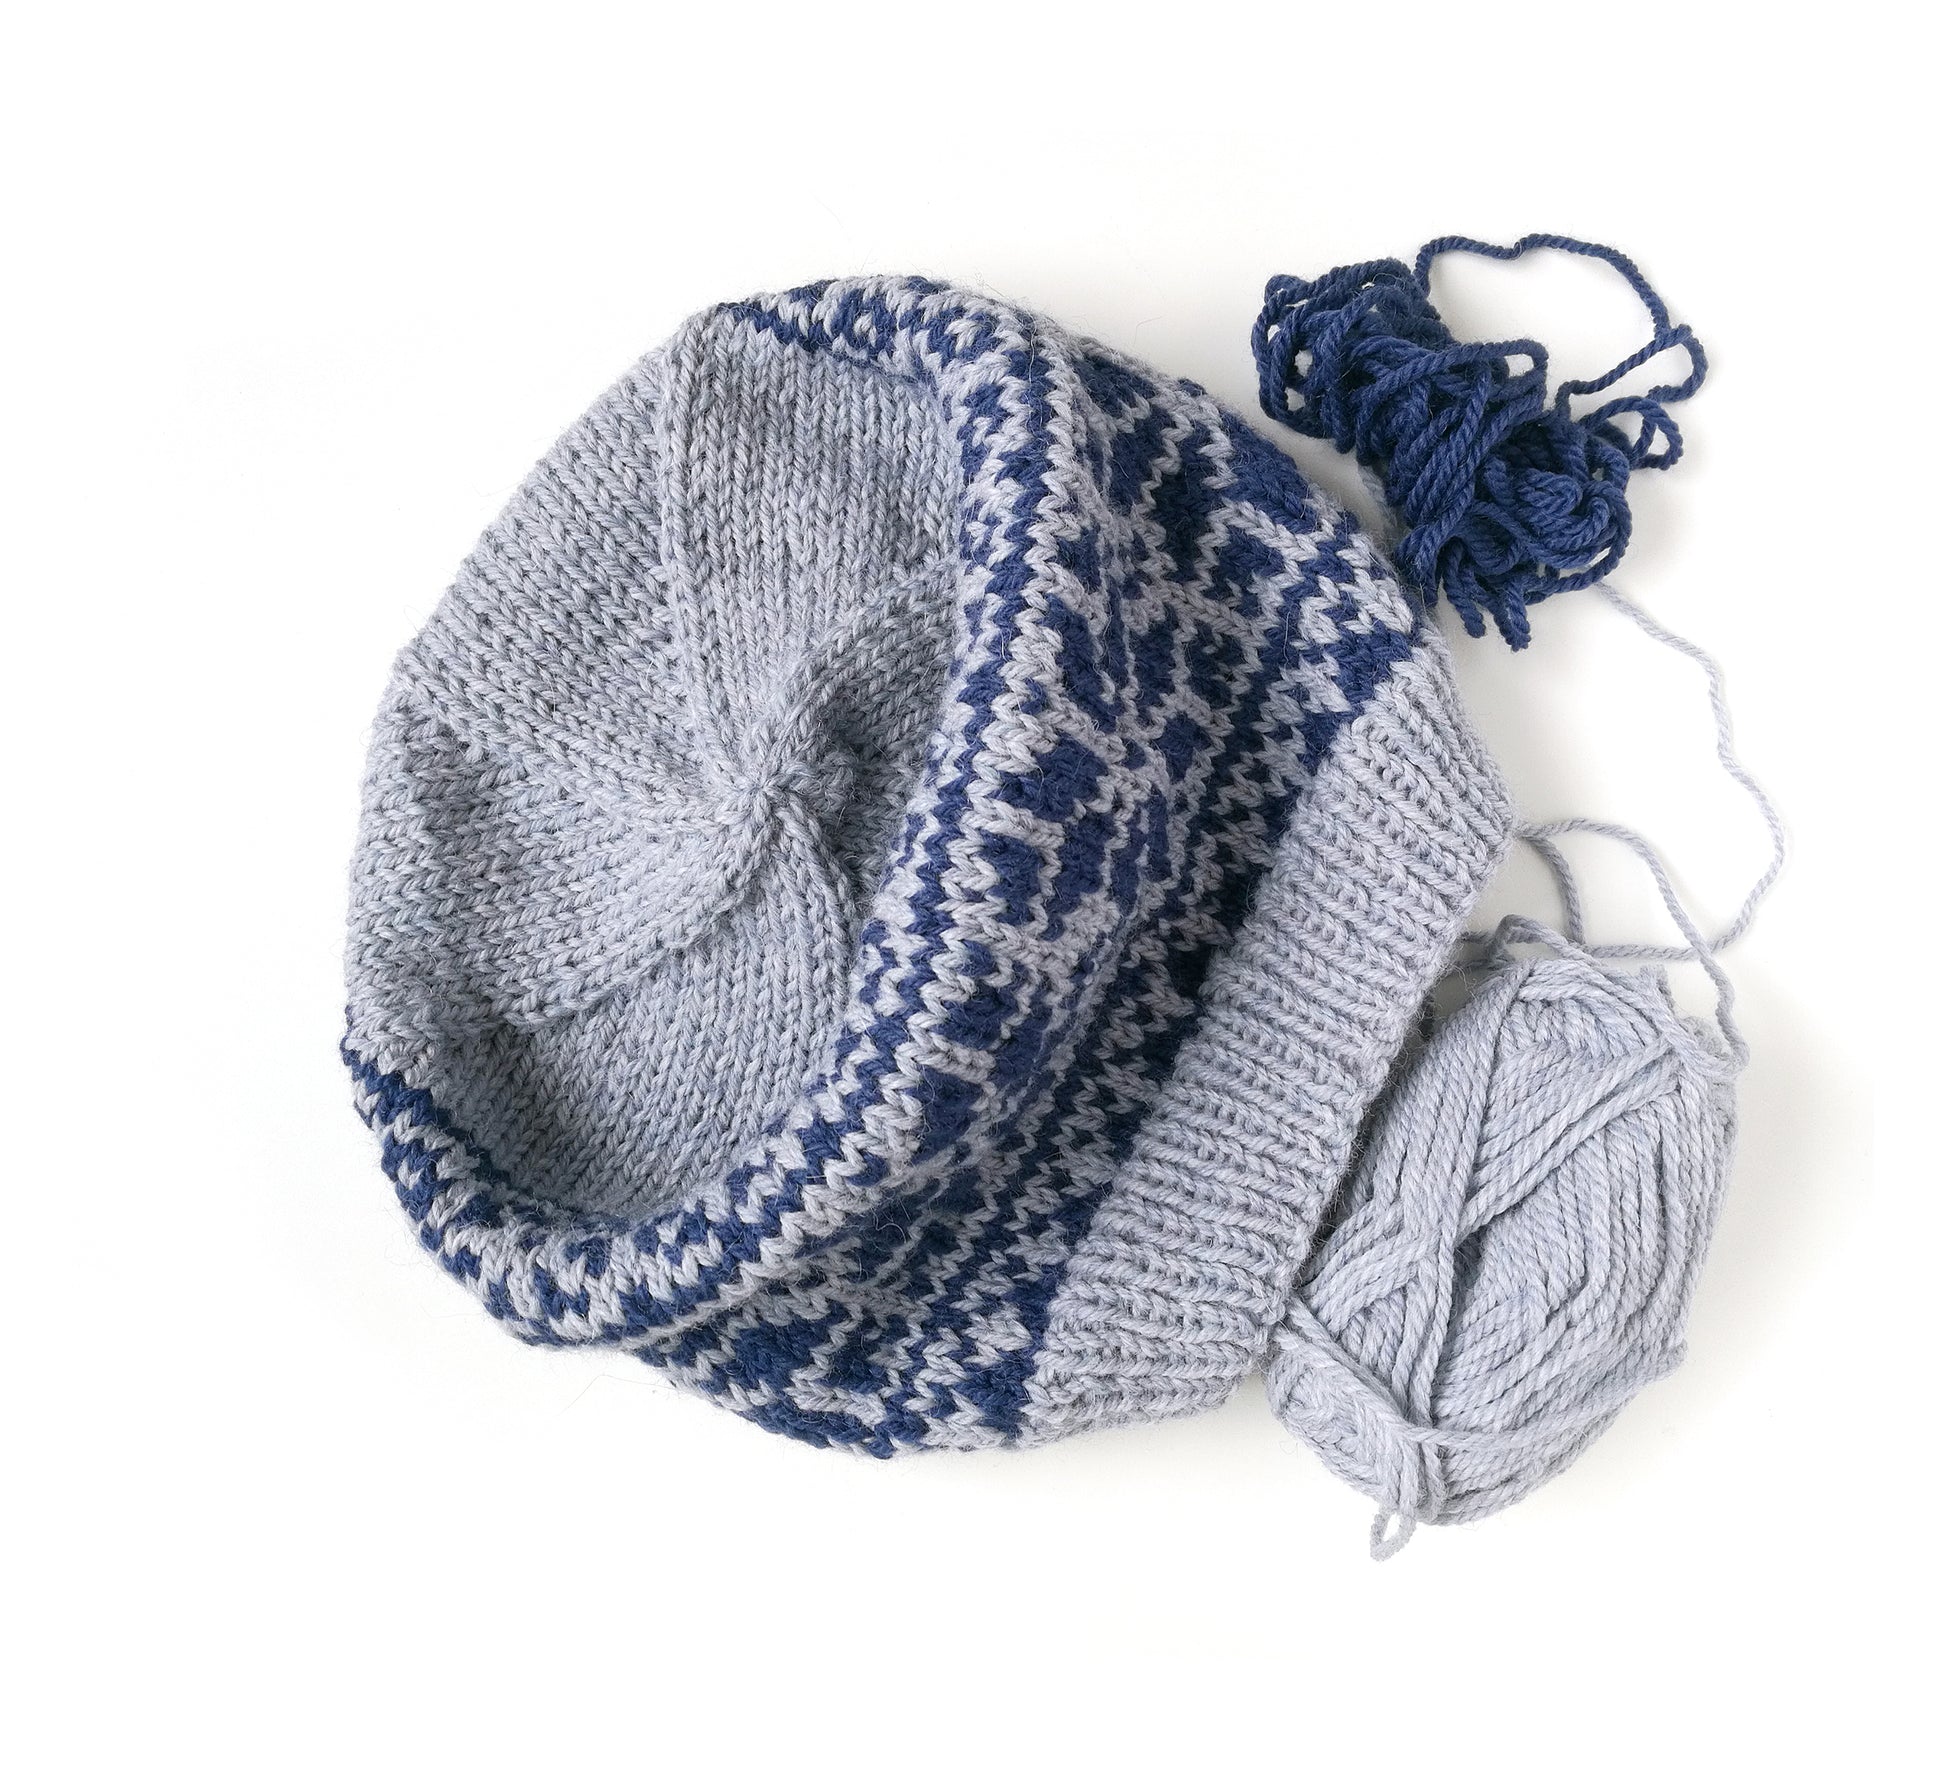 grey and blue wool hand-knitted Fair Isle beanie hat in Roses knitting pattern with yarn skeins